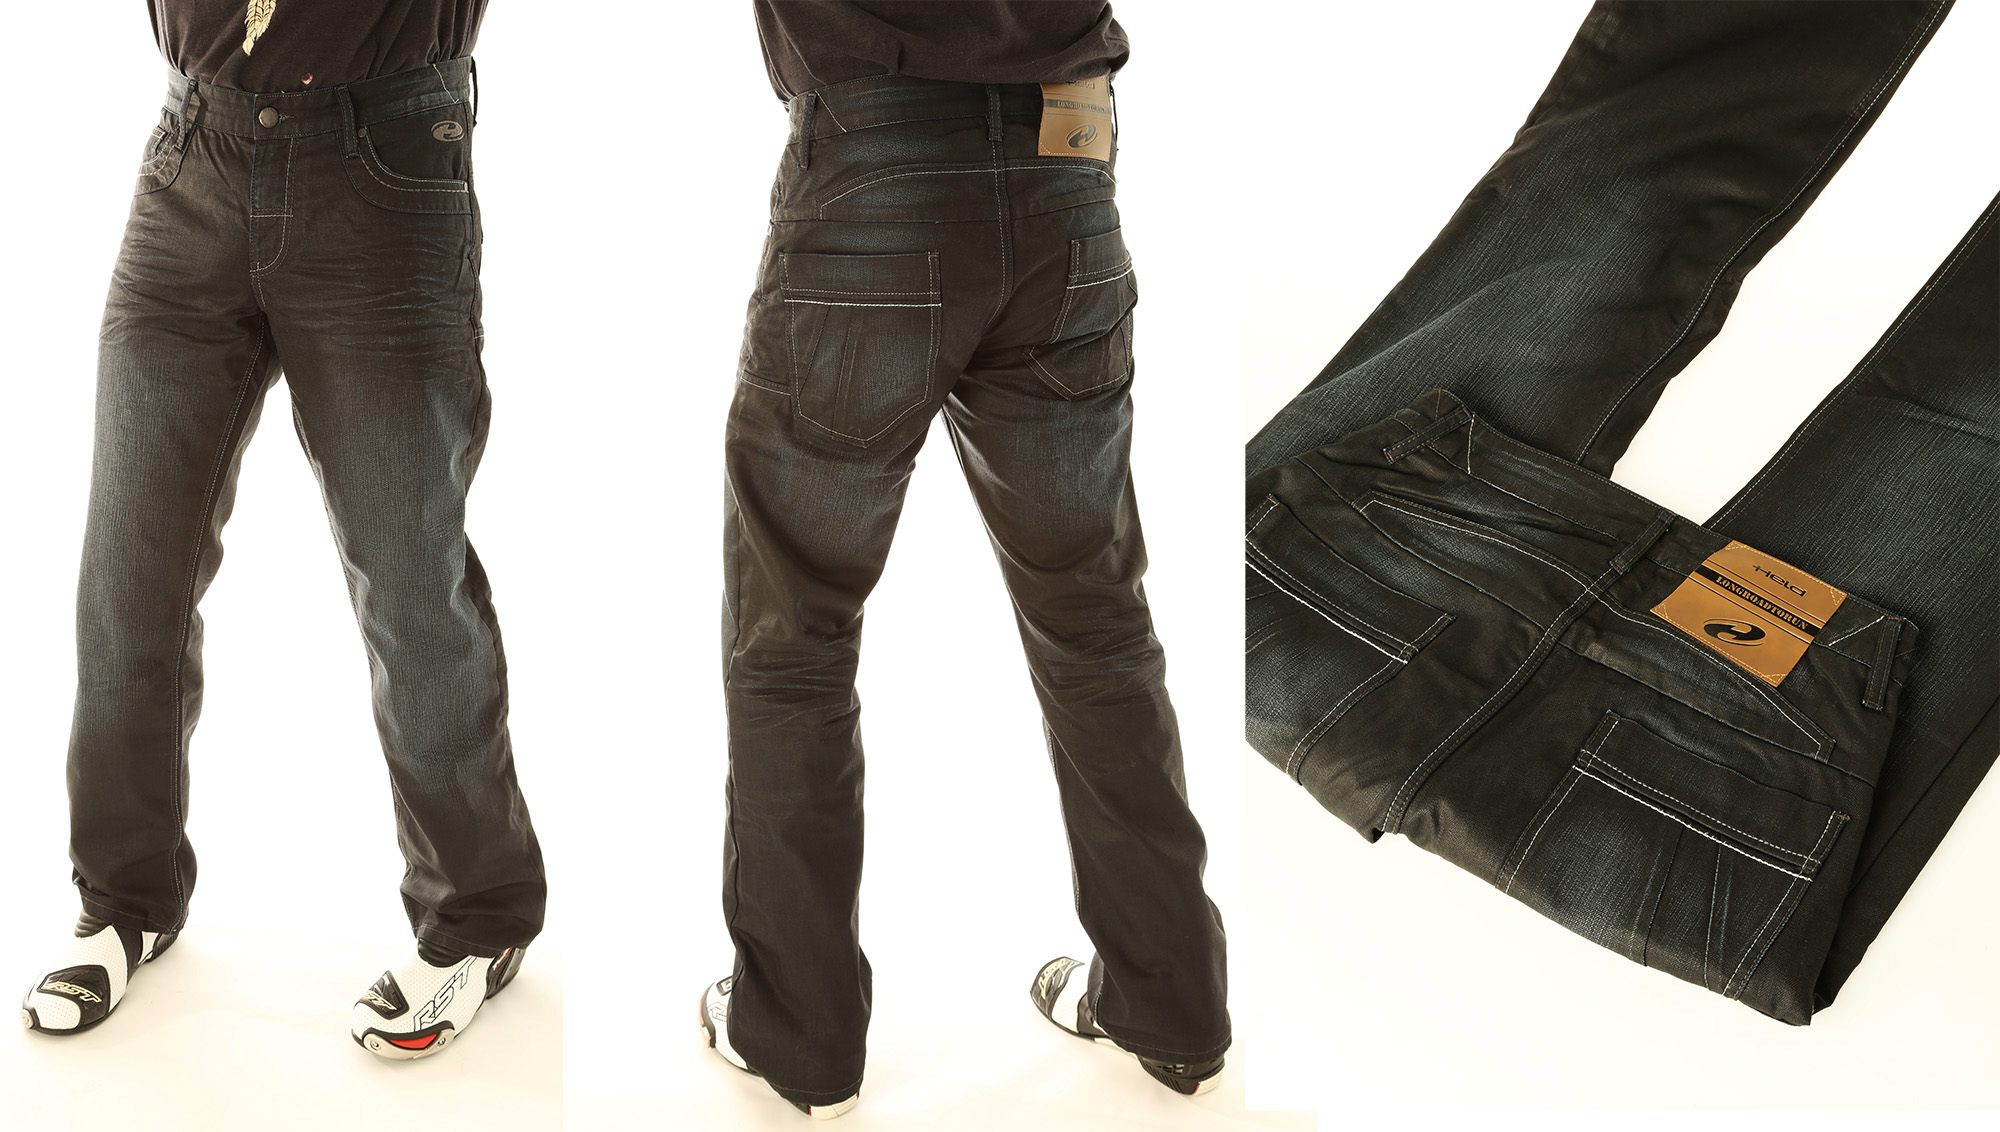 Tested: Kevlar jeans review